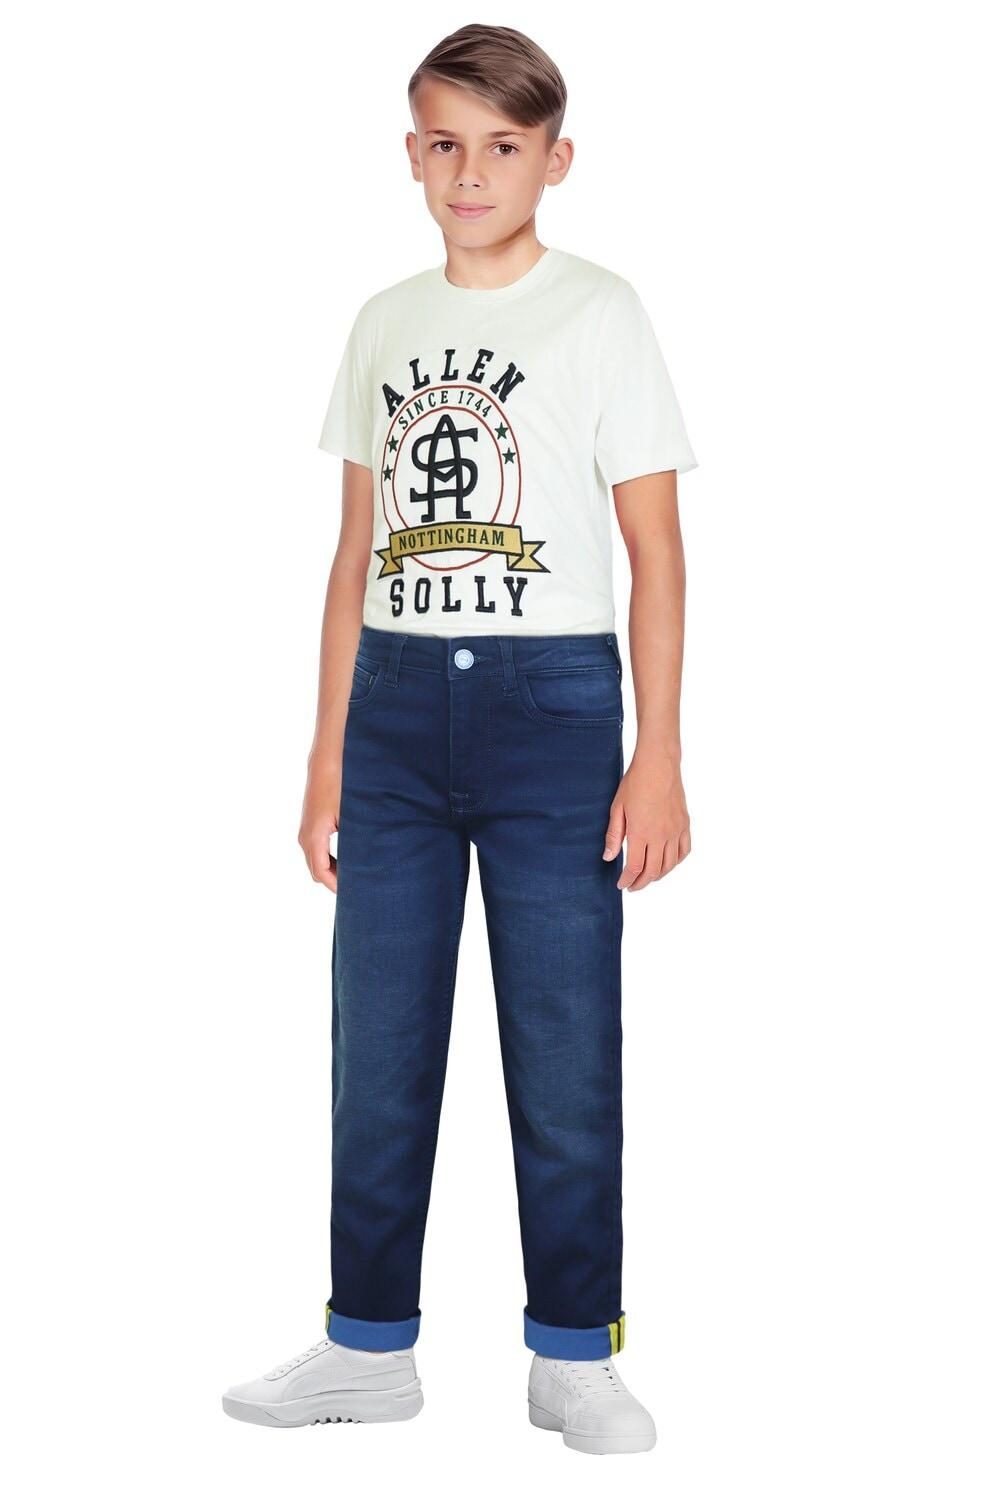 Boys Navy Slim Fit Jeans By Allen Solly 